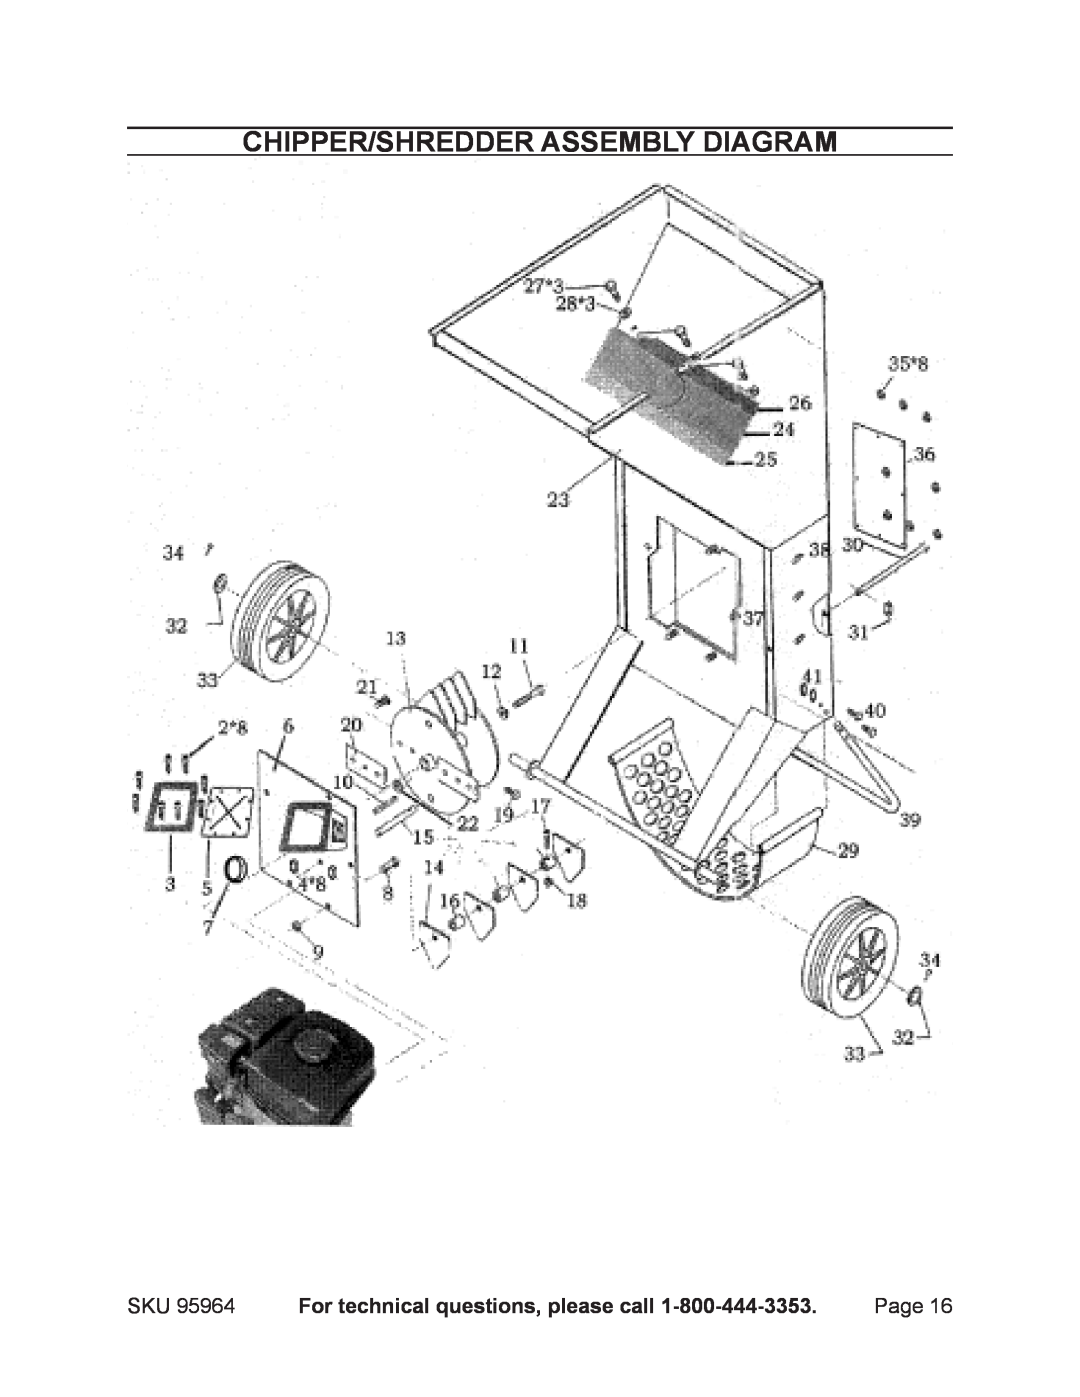 Harbor Freight Tools 95964 operating instructions Chipper/shredder assembly diagram, For technical questions, please call 